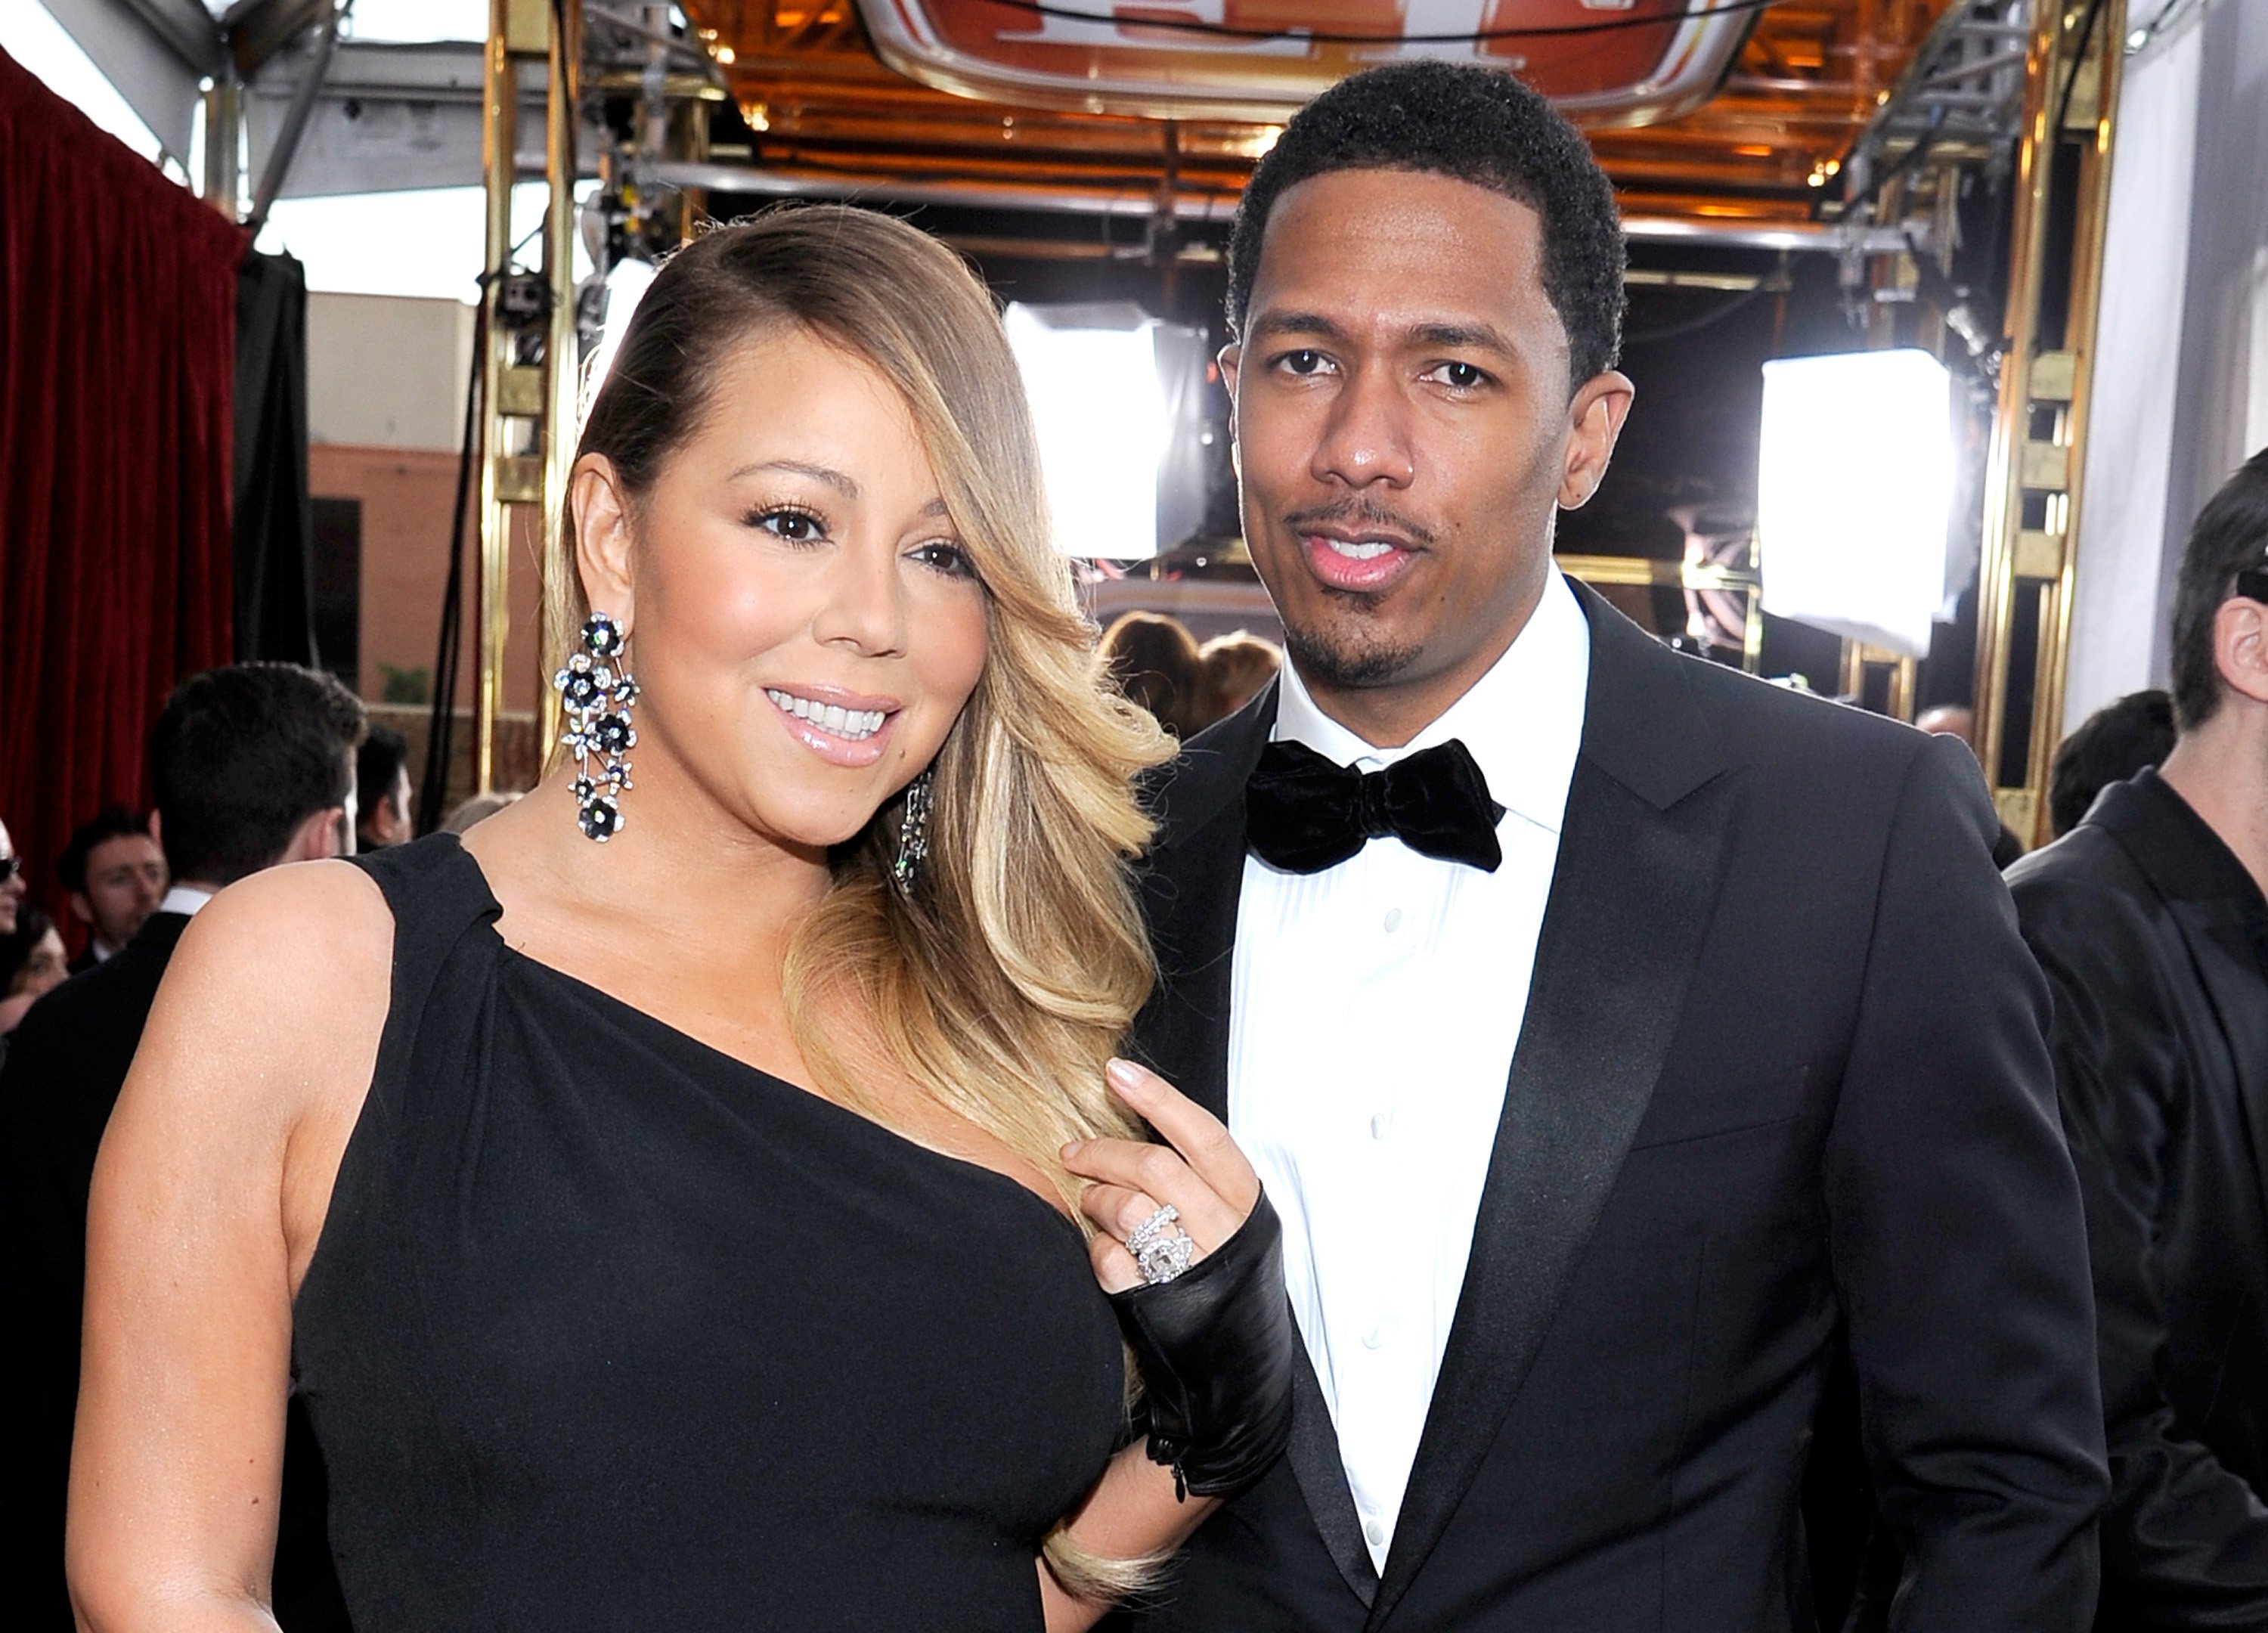 Singer-actress Mariah Carey and TV personality Nick Cannon attend the 20th Annual Screen Actors Guild Awards at The Shrine Auditorium on January 18, 2014, in Los Angeles, California. | Source: Getty Images.